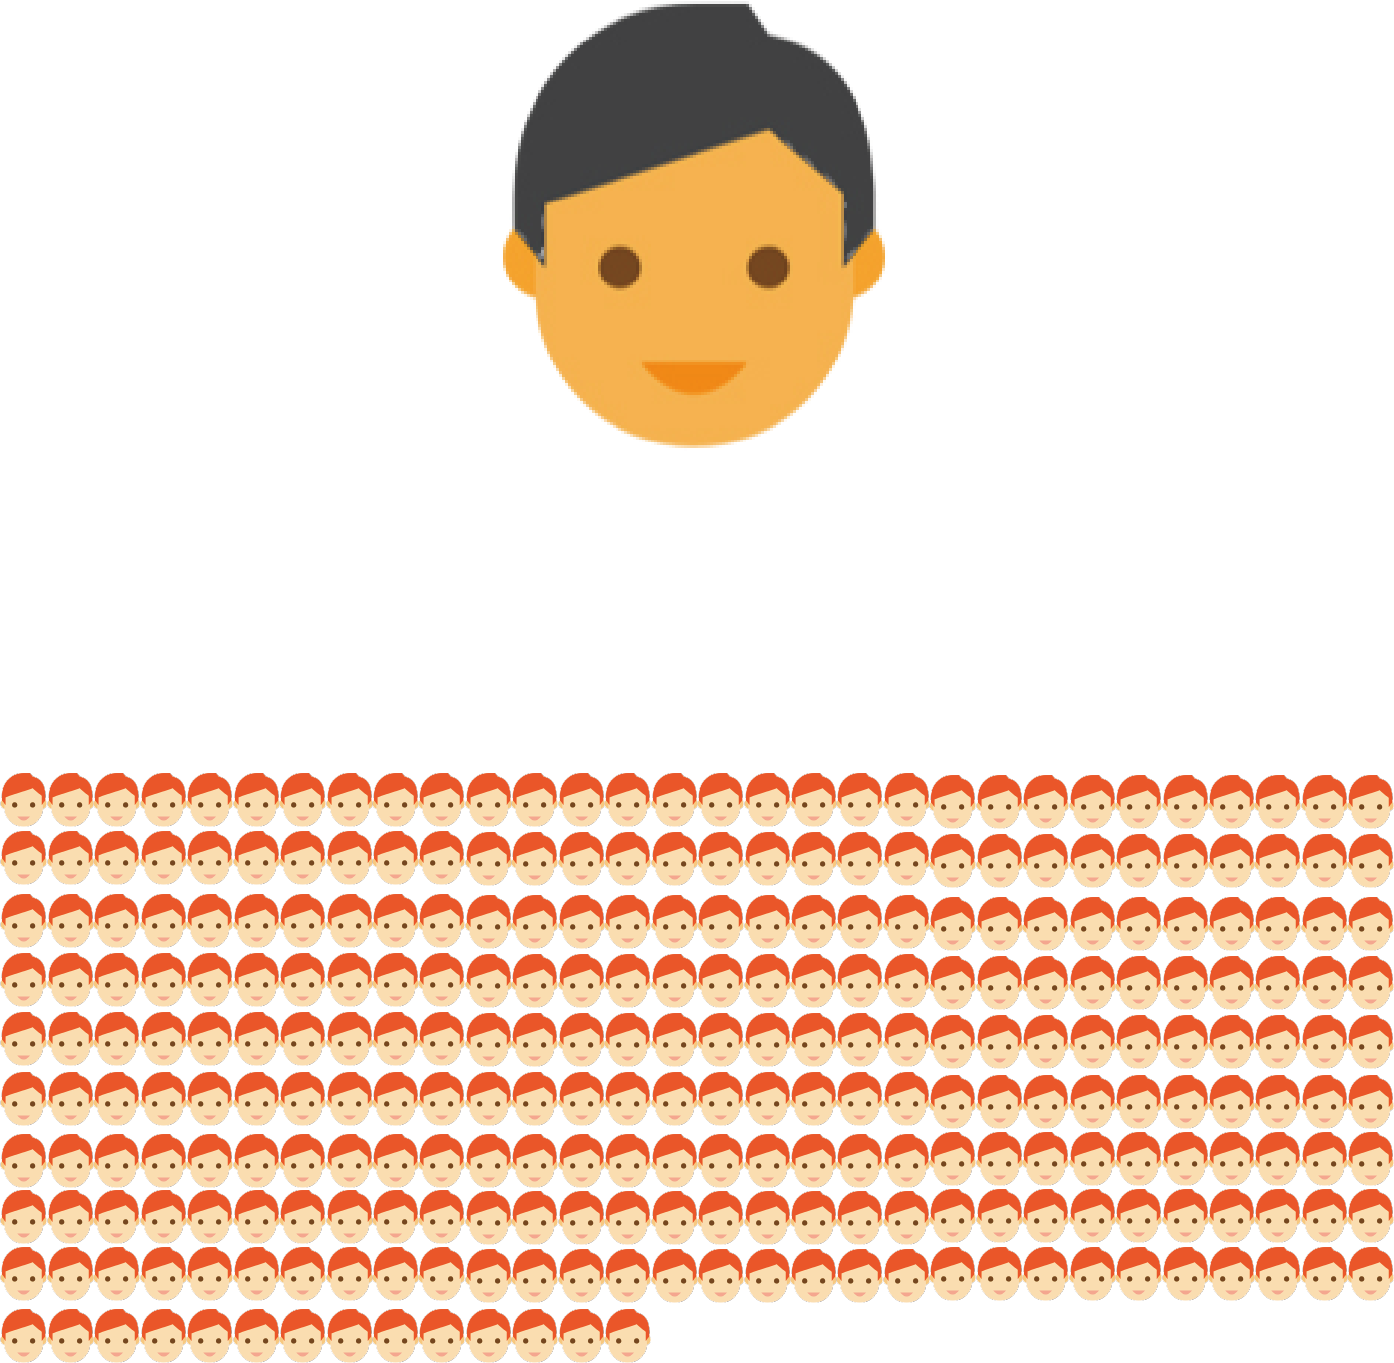 Ratio of social workers to students in Singapore